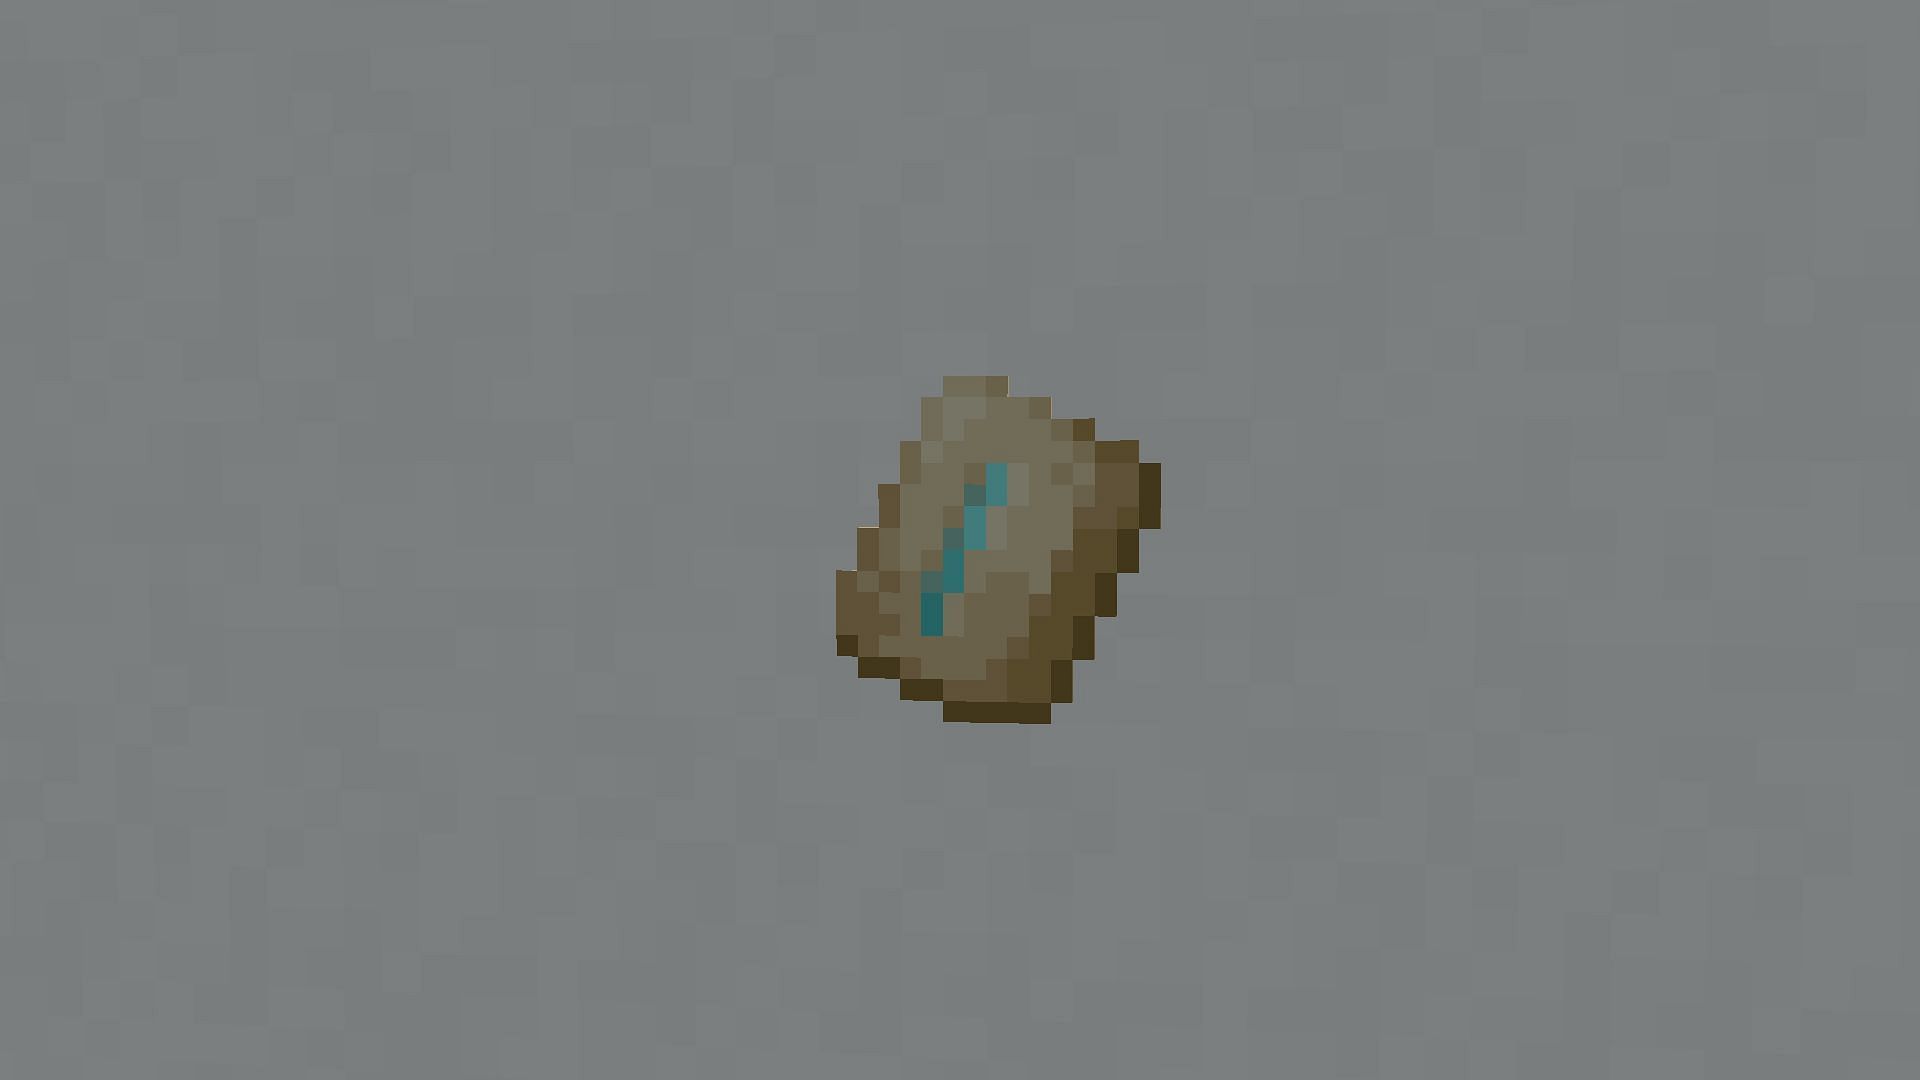 Dune Armor Trim can be found in Desert Temple in Minecraft (Image via Mojang)